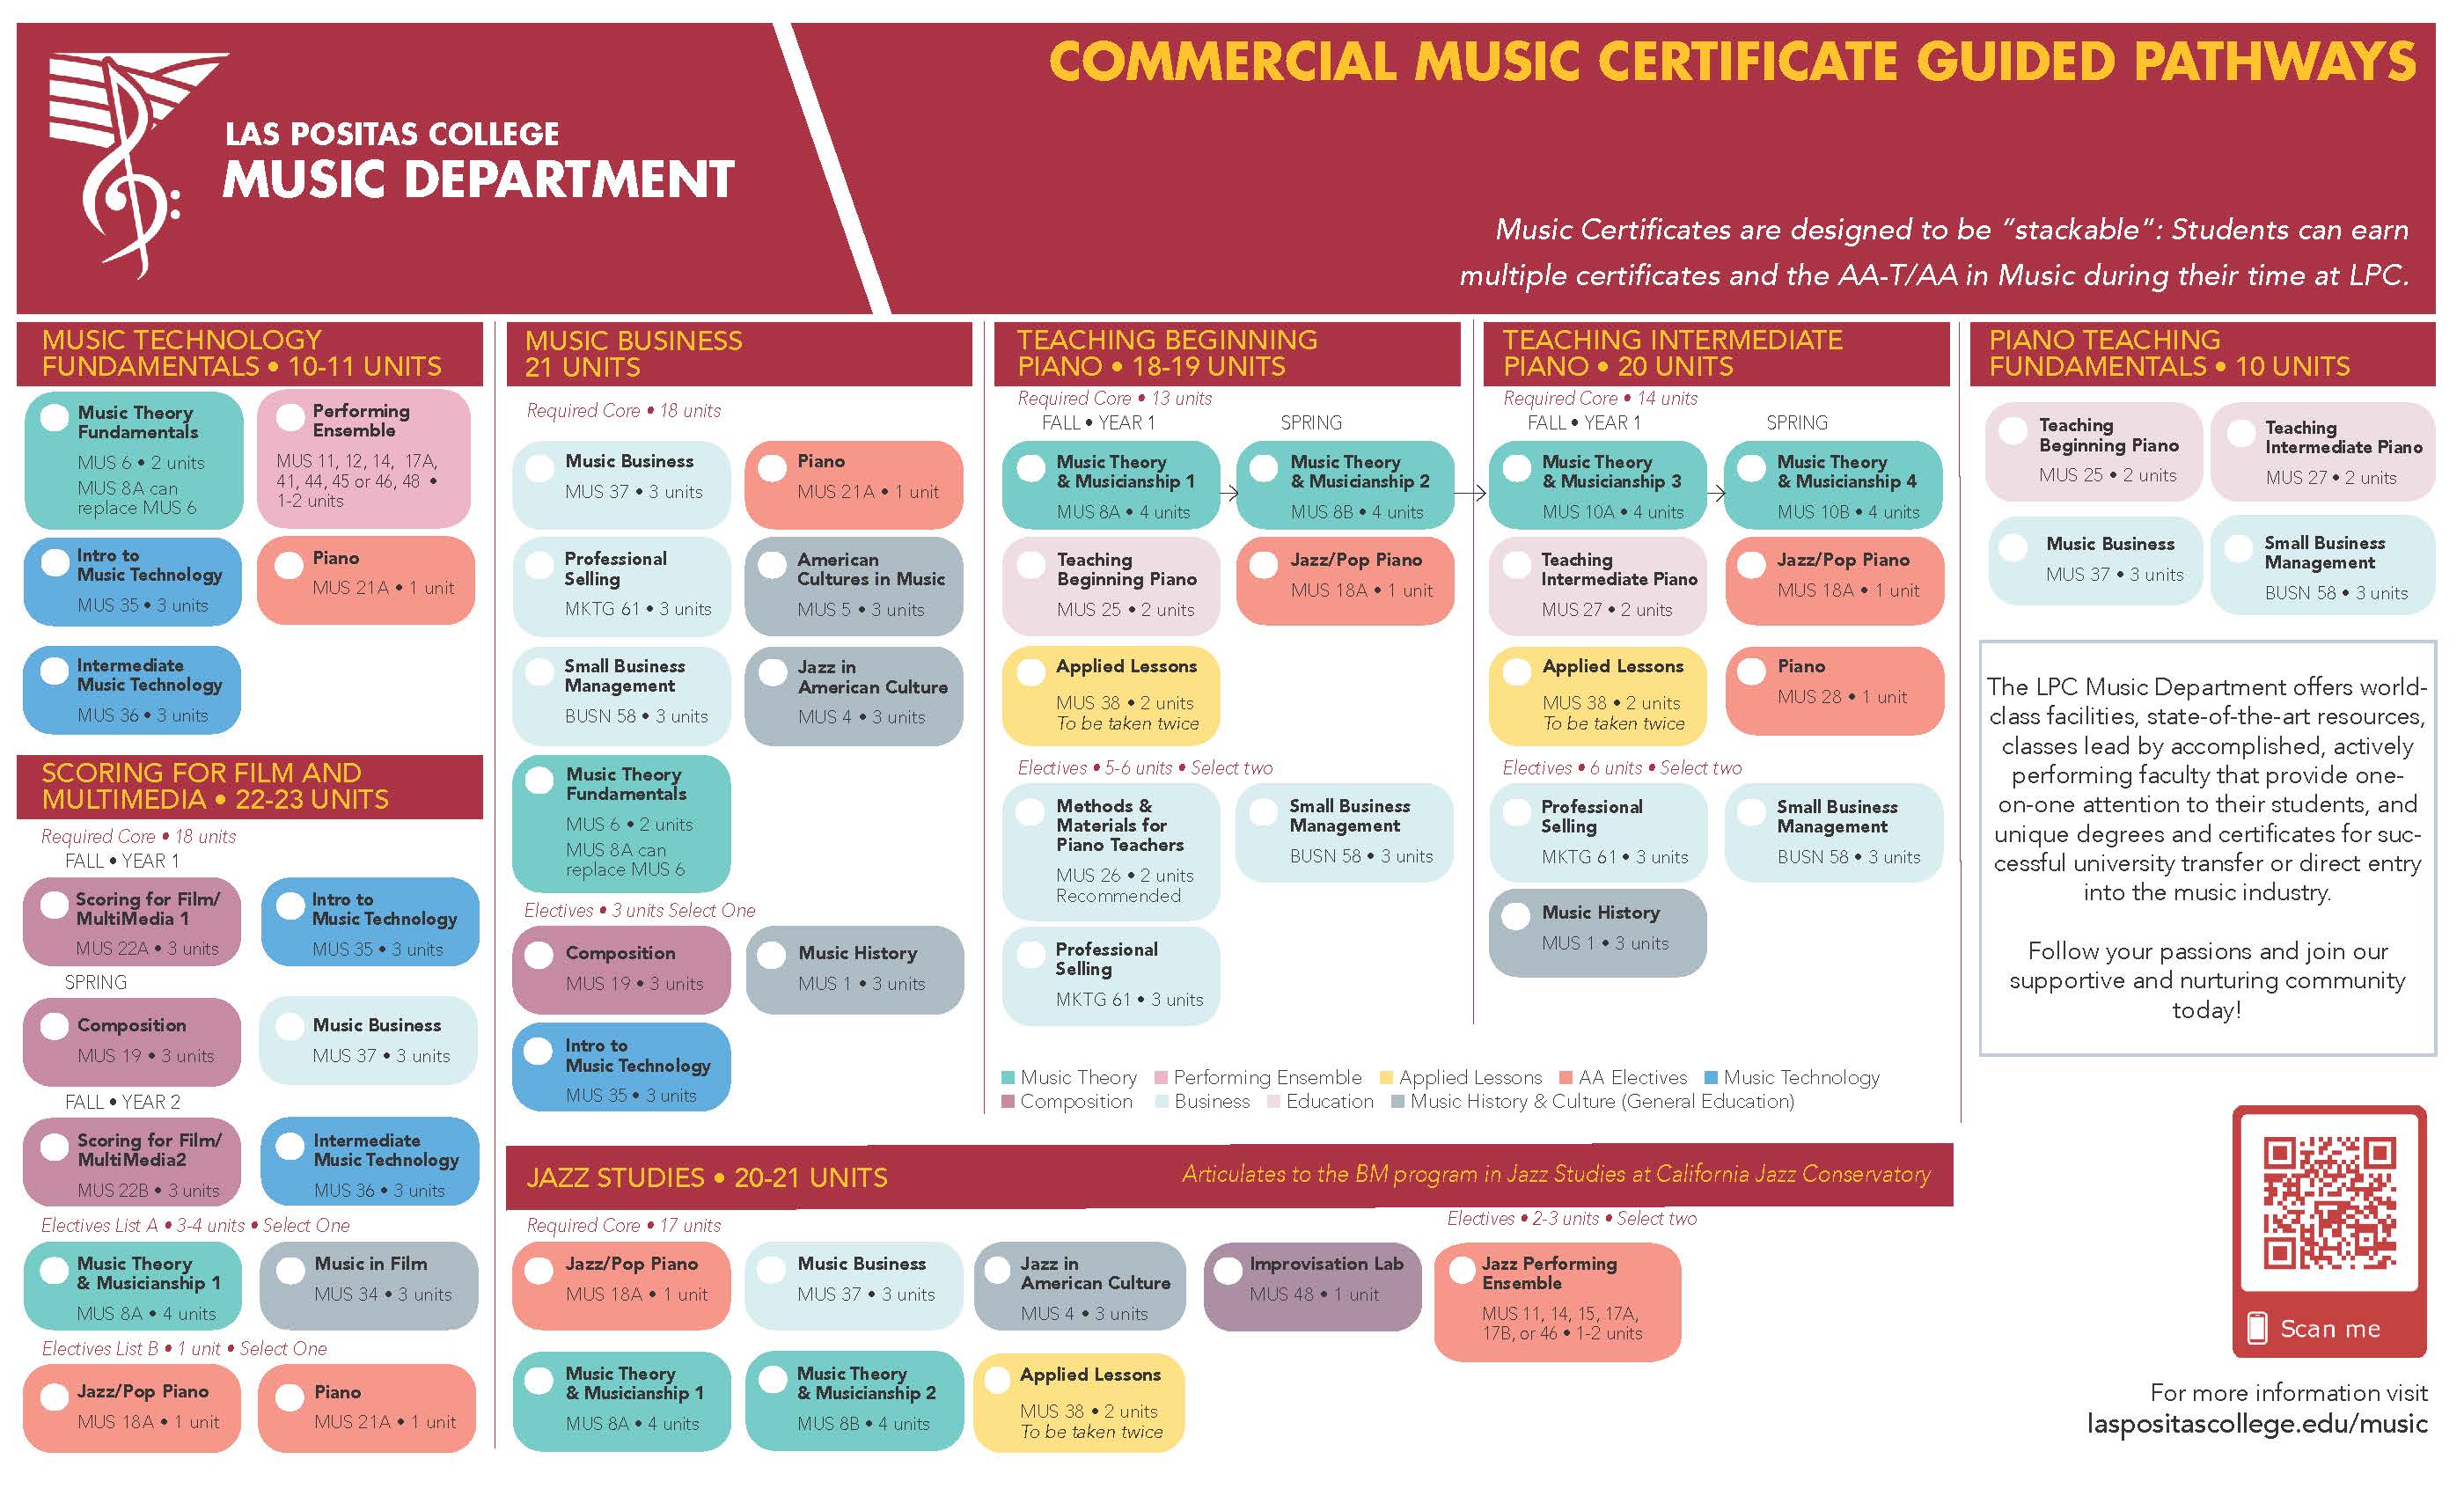 LPC Music Certificate Guided Pathways